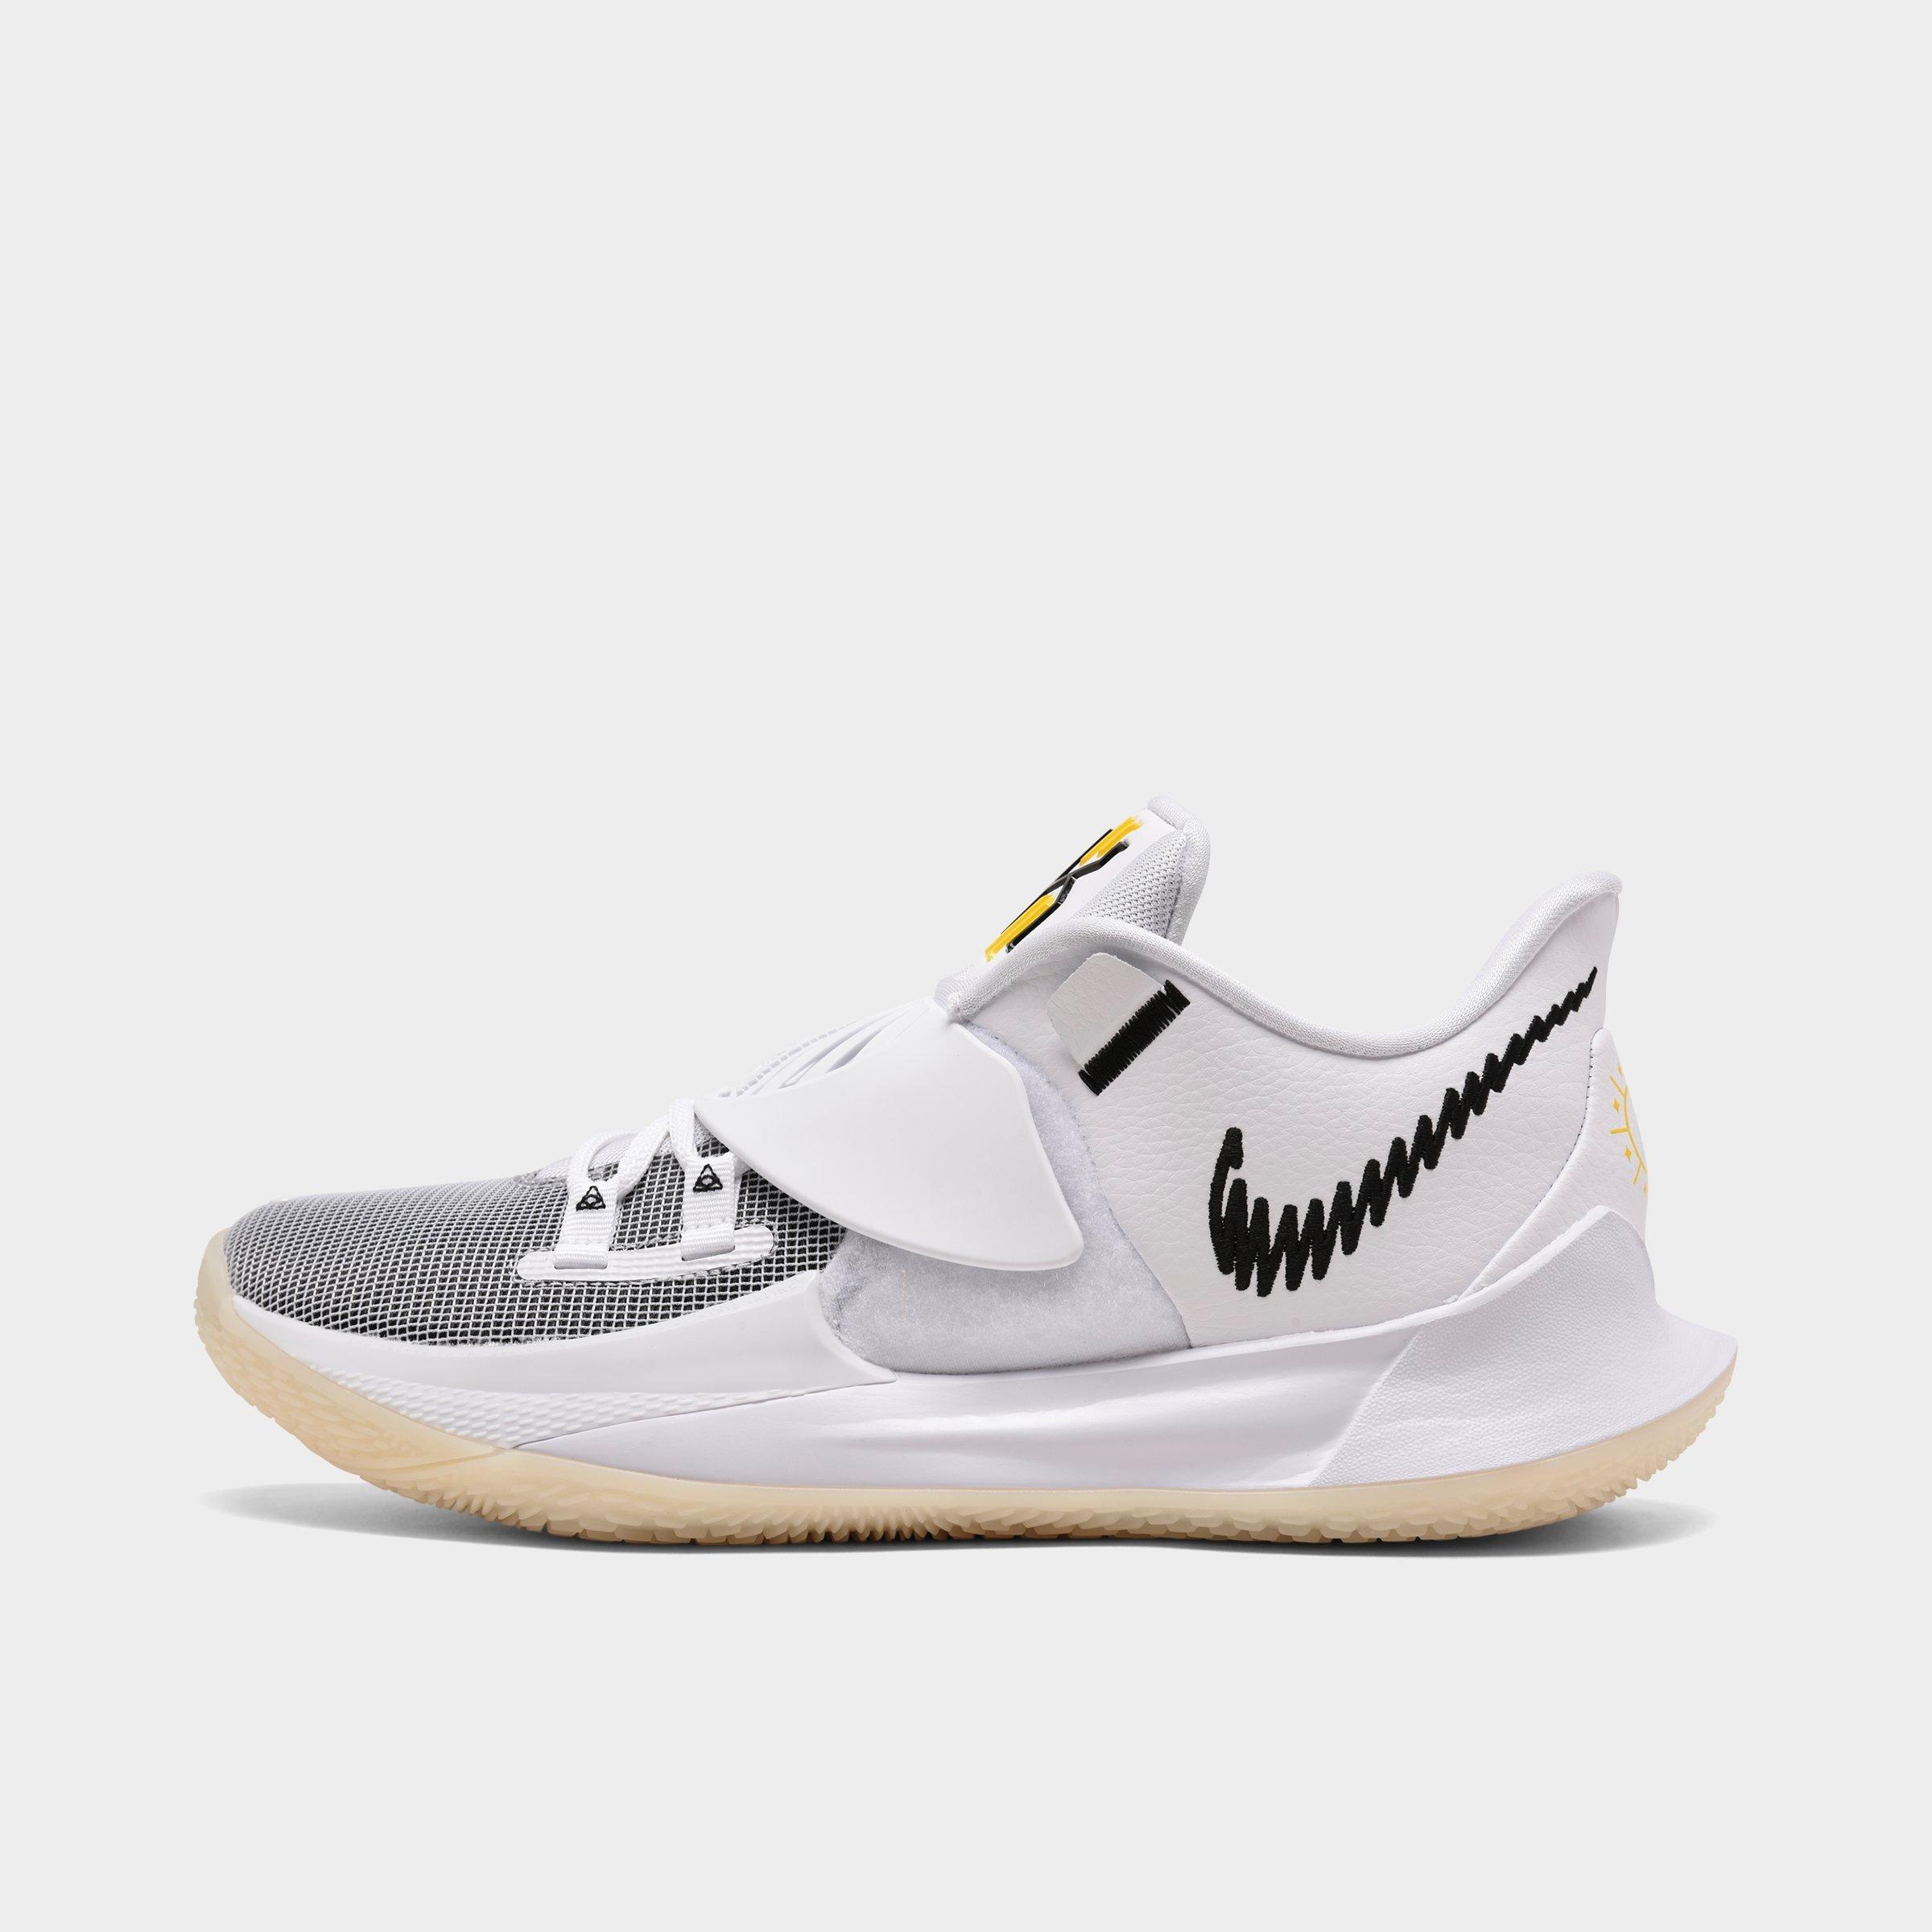 kyrie shoes finish line